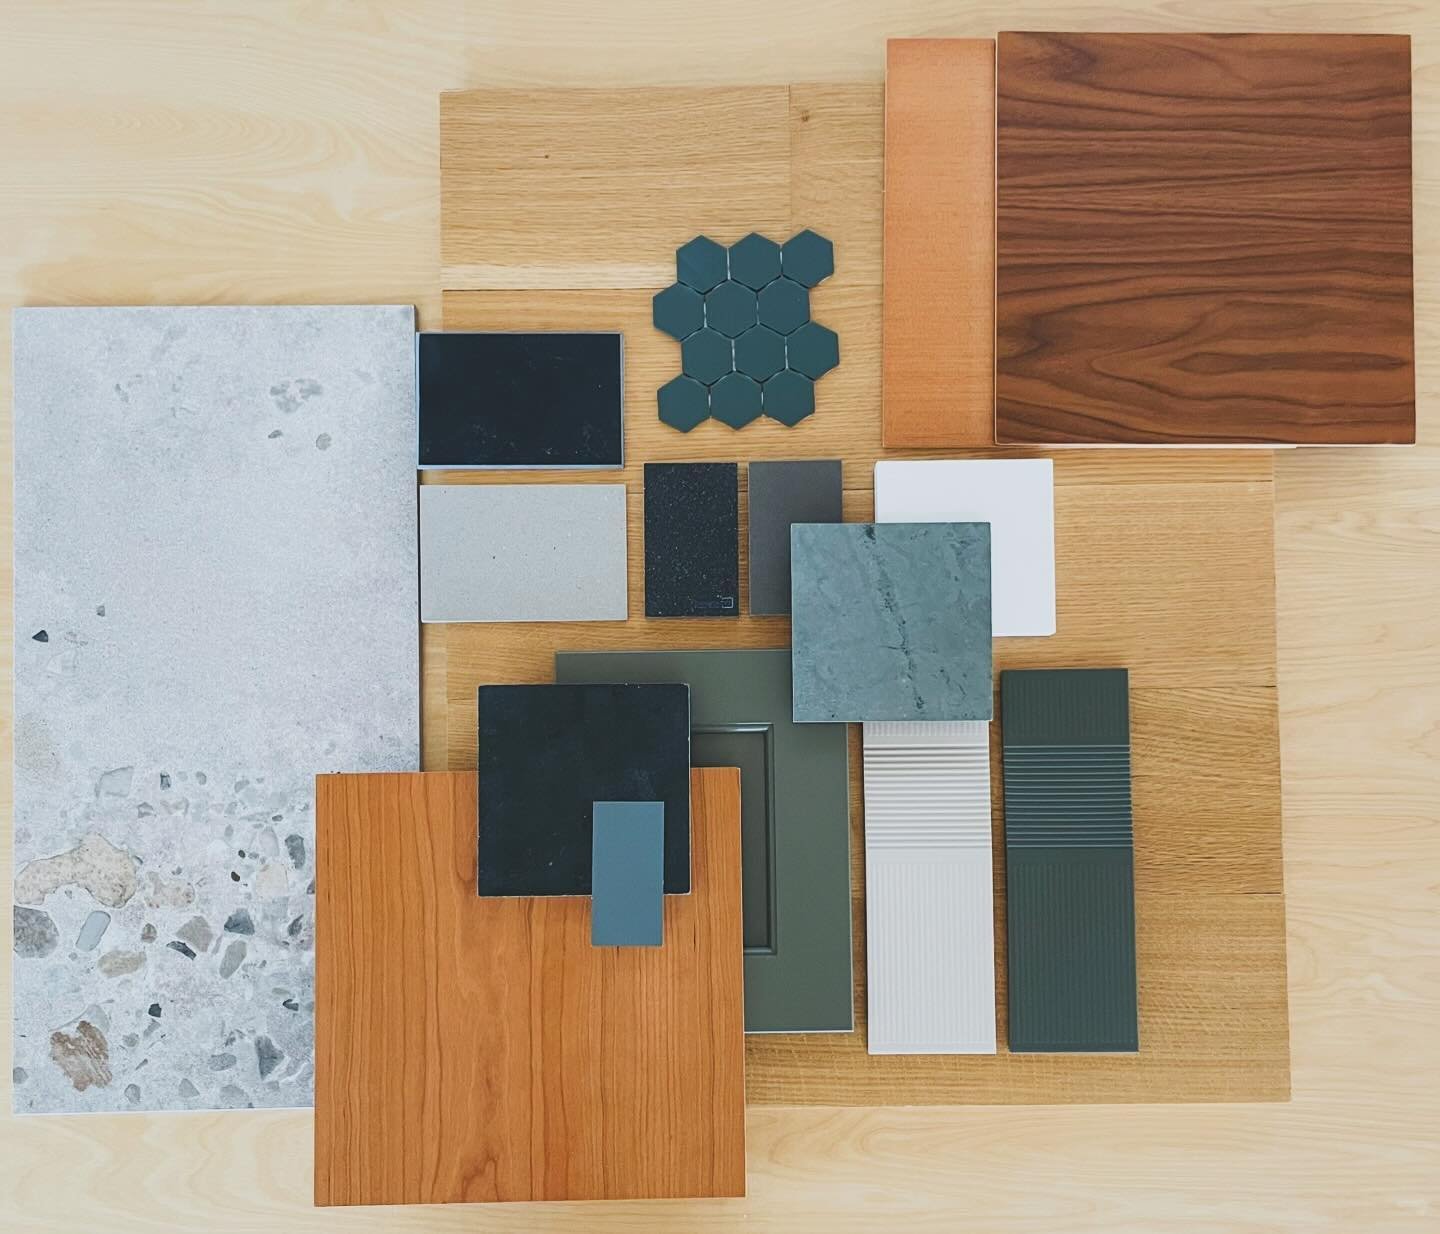 Materials and colors referencing those found in nature are the source of inspiration for this interior palette, and adjectives coming to mind include calm, casual, comfortable, and timeless. Looking forward to seeing construction starting soon on thi